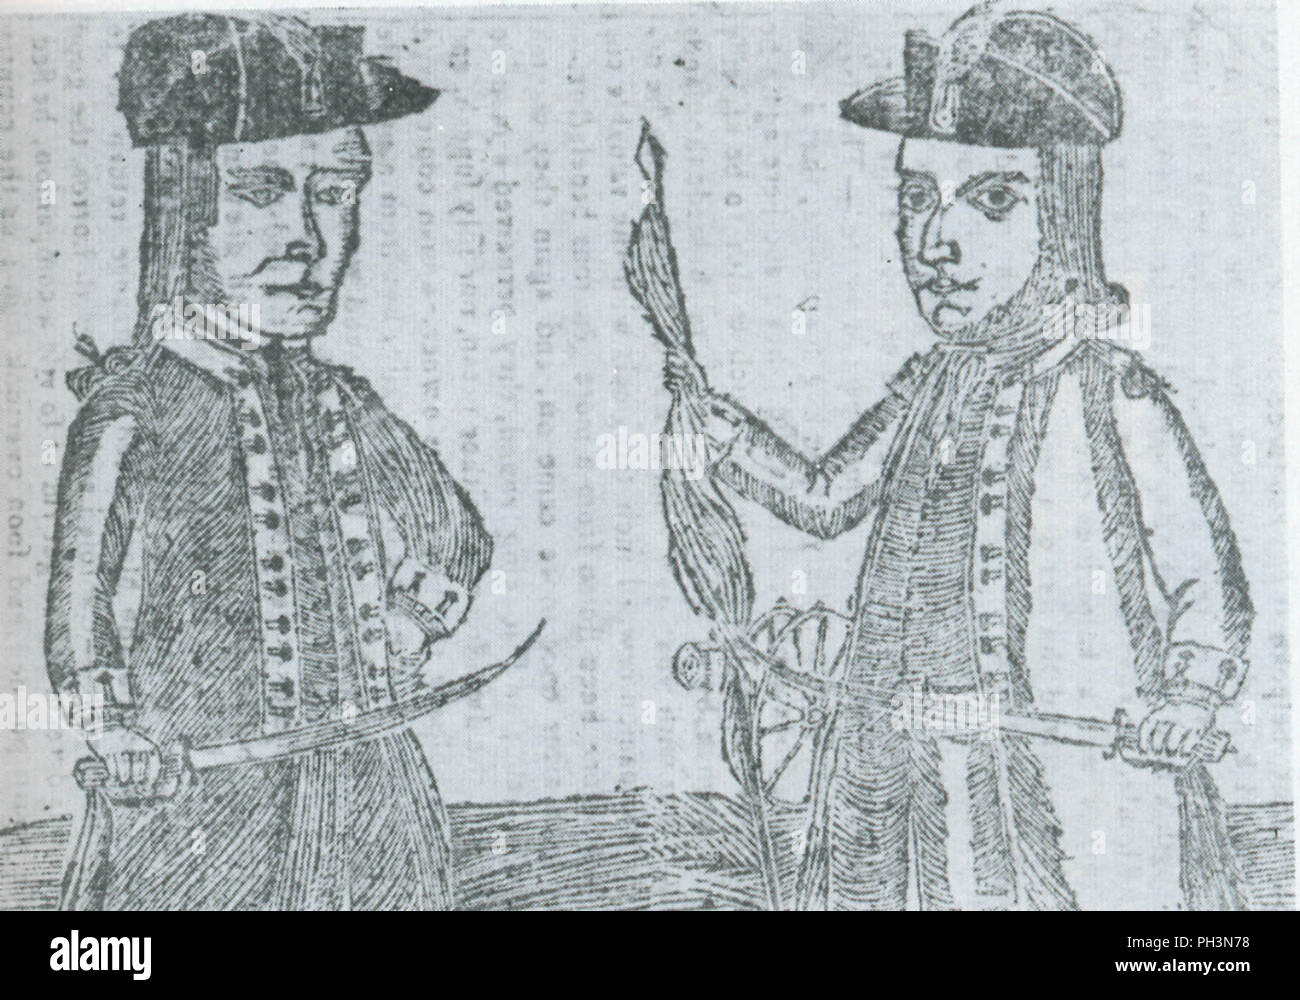 Contemporary engraving depicting Daniel Shays (left) and Job Shattuck, another rebel leader; the artist intentionally rendered them in an unflattering way Stock Photo